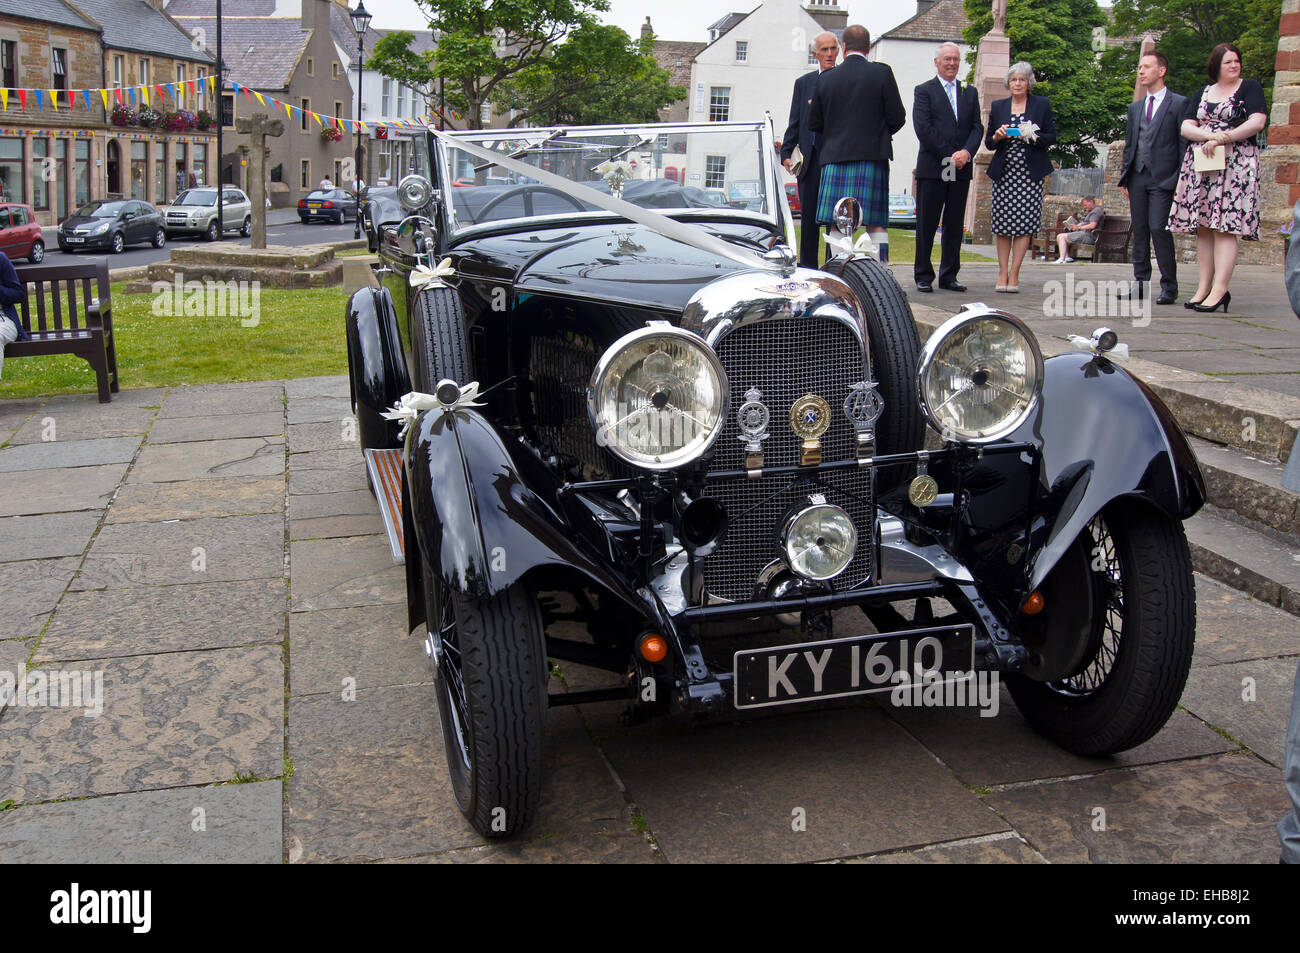 2 litre Carlton bodied Lagonda Speed drophead coupé, 1932, in use as a wedding limousine, Kirkwall, Orkney Islands, Scotland Stock Photo